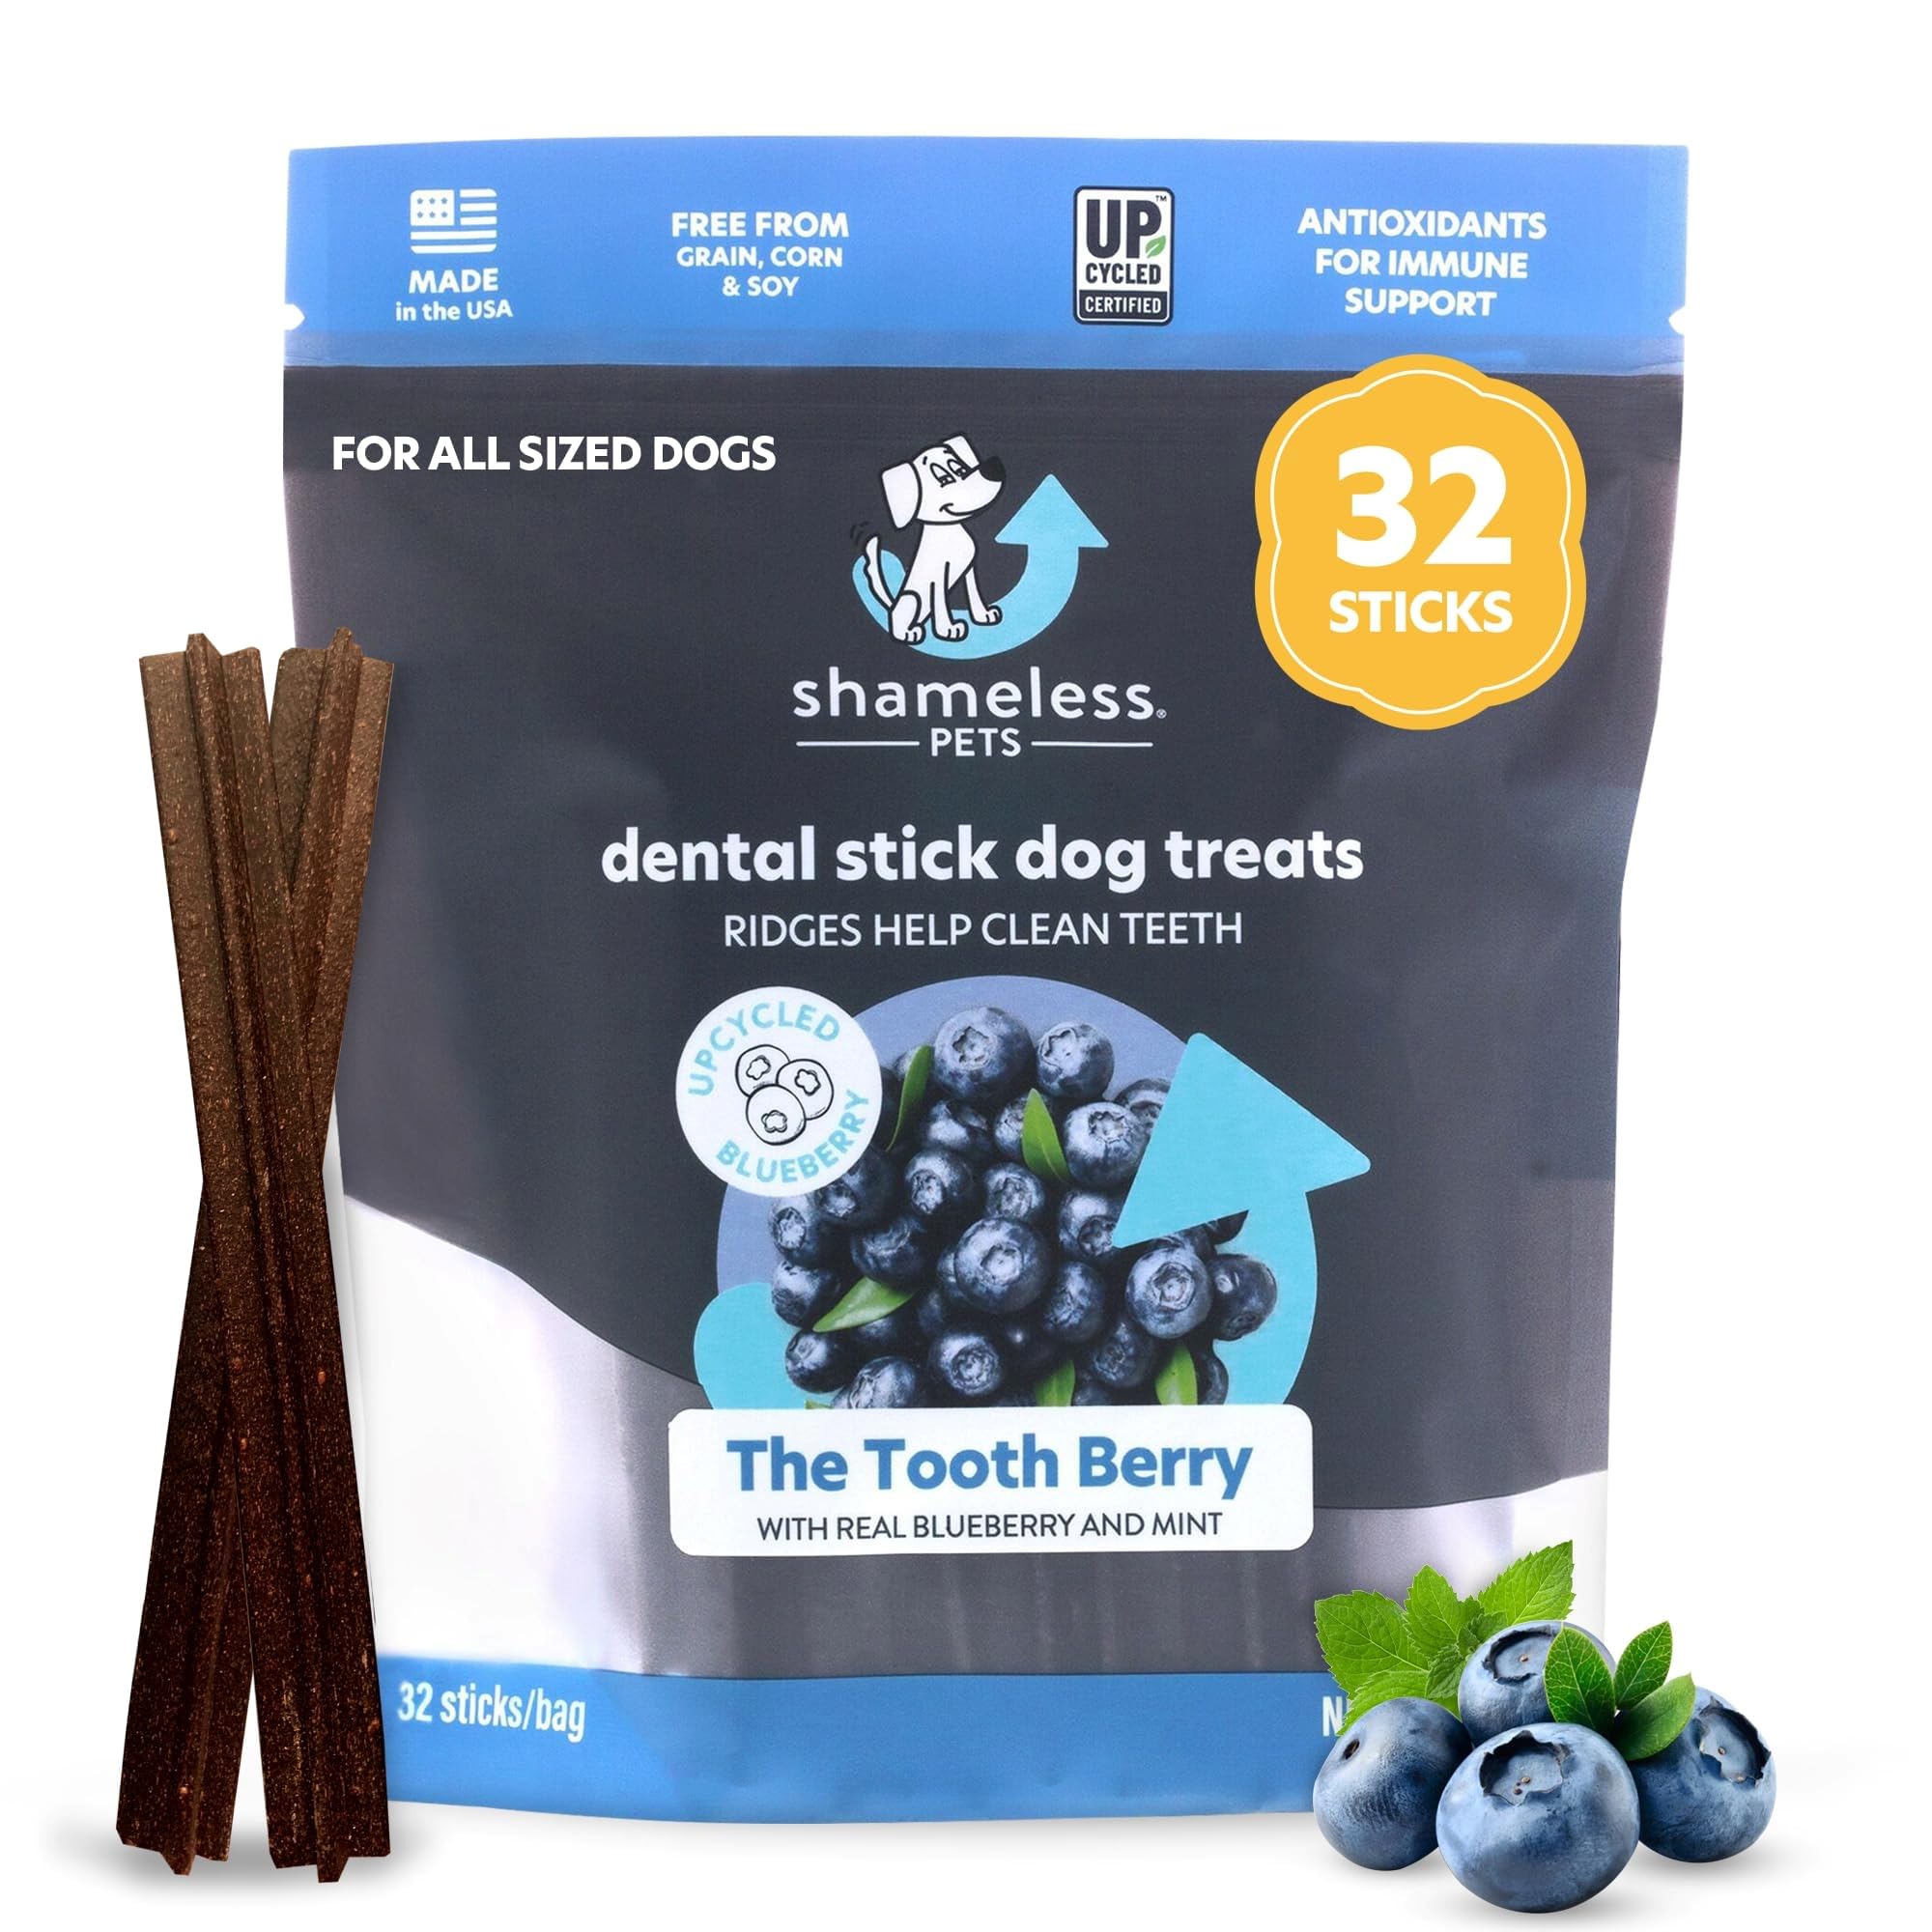 Shameless Pets Dental Treats for Dogs, The Tooth Berry (32 Sticks) - NOW $3.99